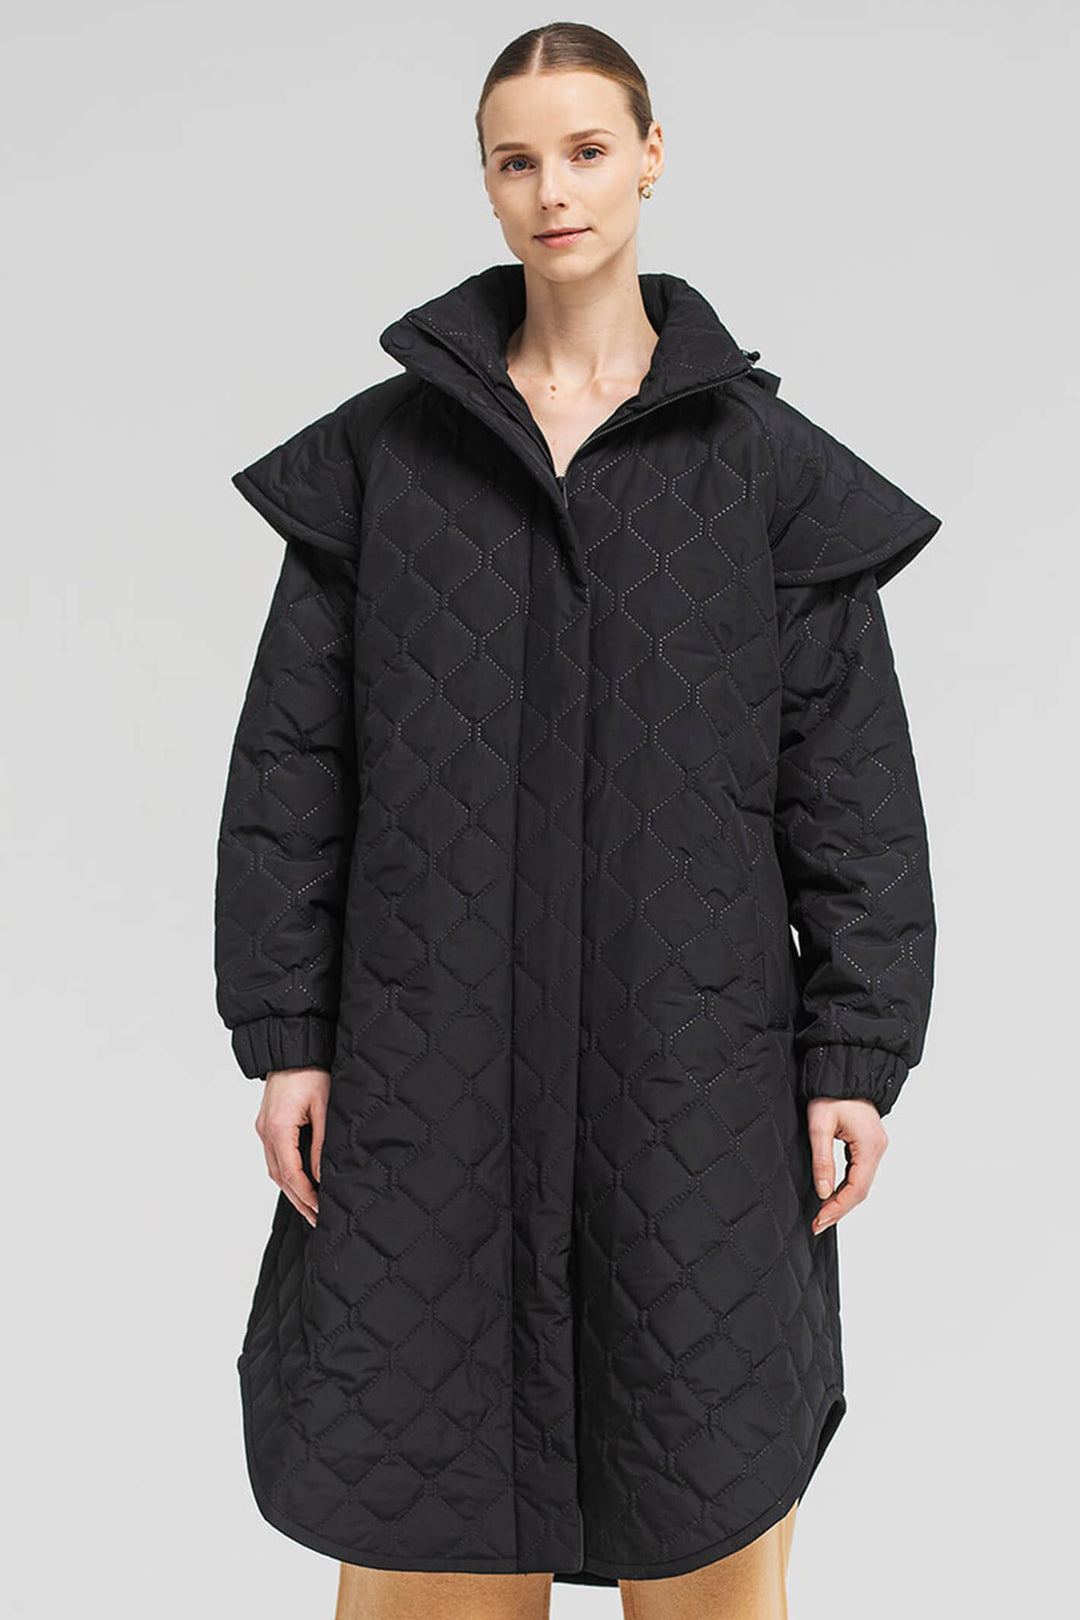 BRGN 15052P 095 New Black Quilted Tyfon Waterproof Coat - Olivia Grace Fashion